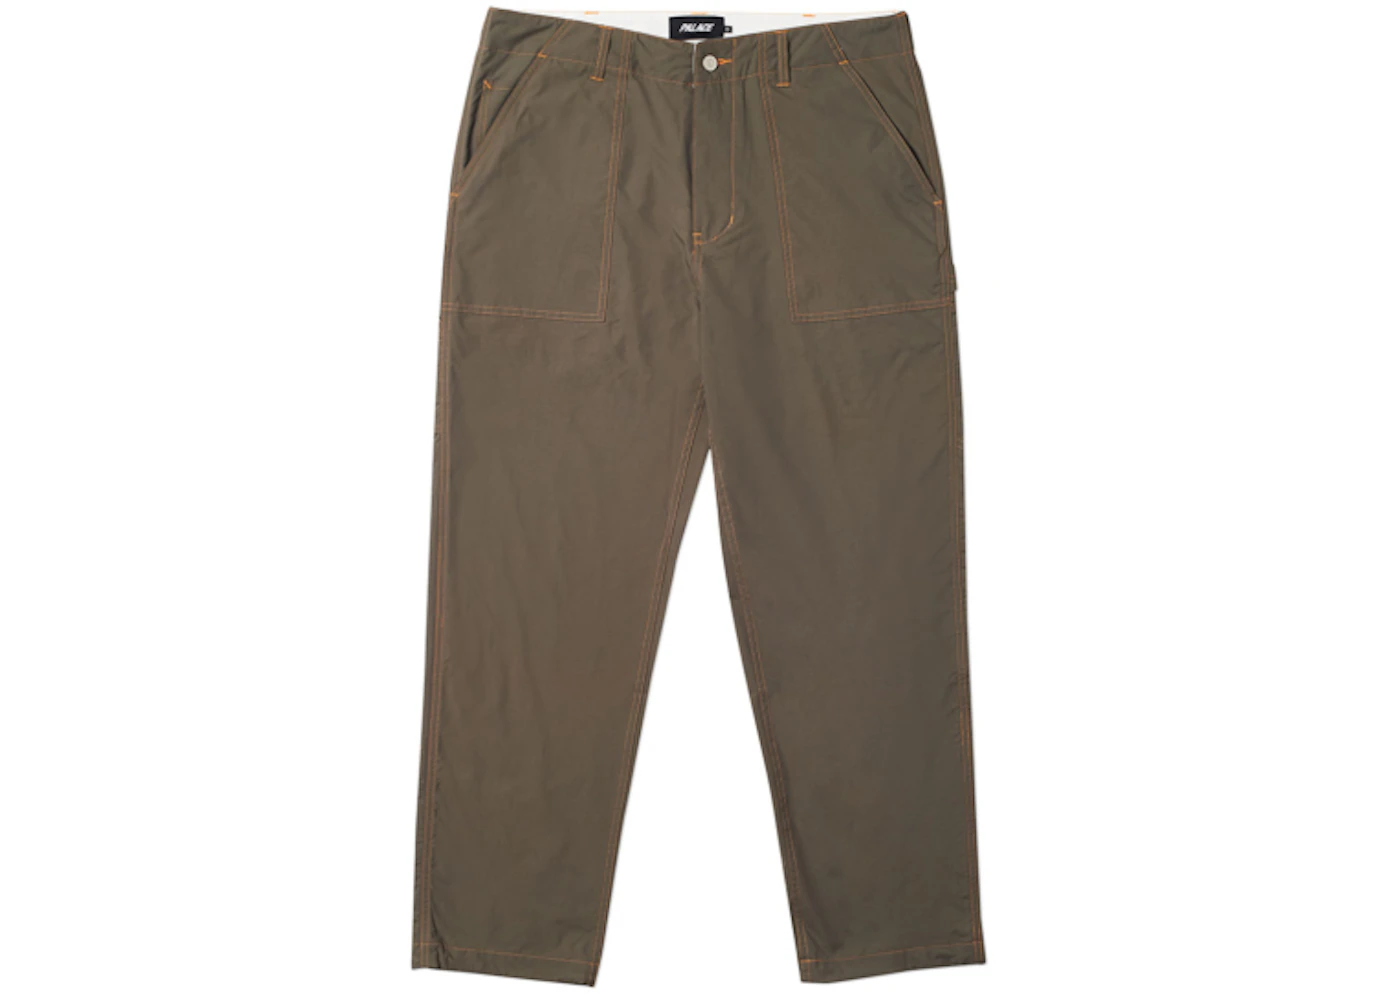 Palace Shell Painter Pant Olive Men's - SS19 - US